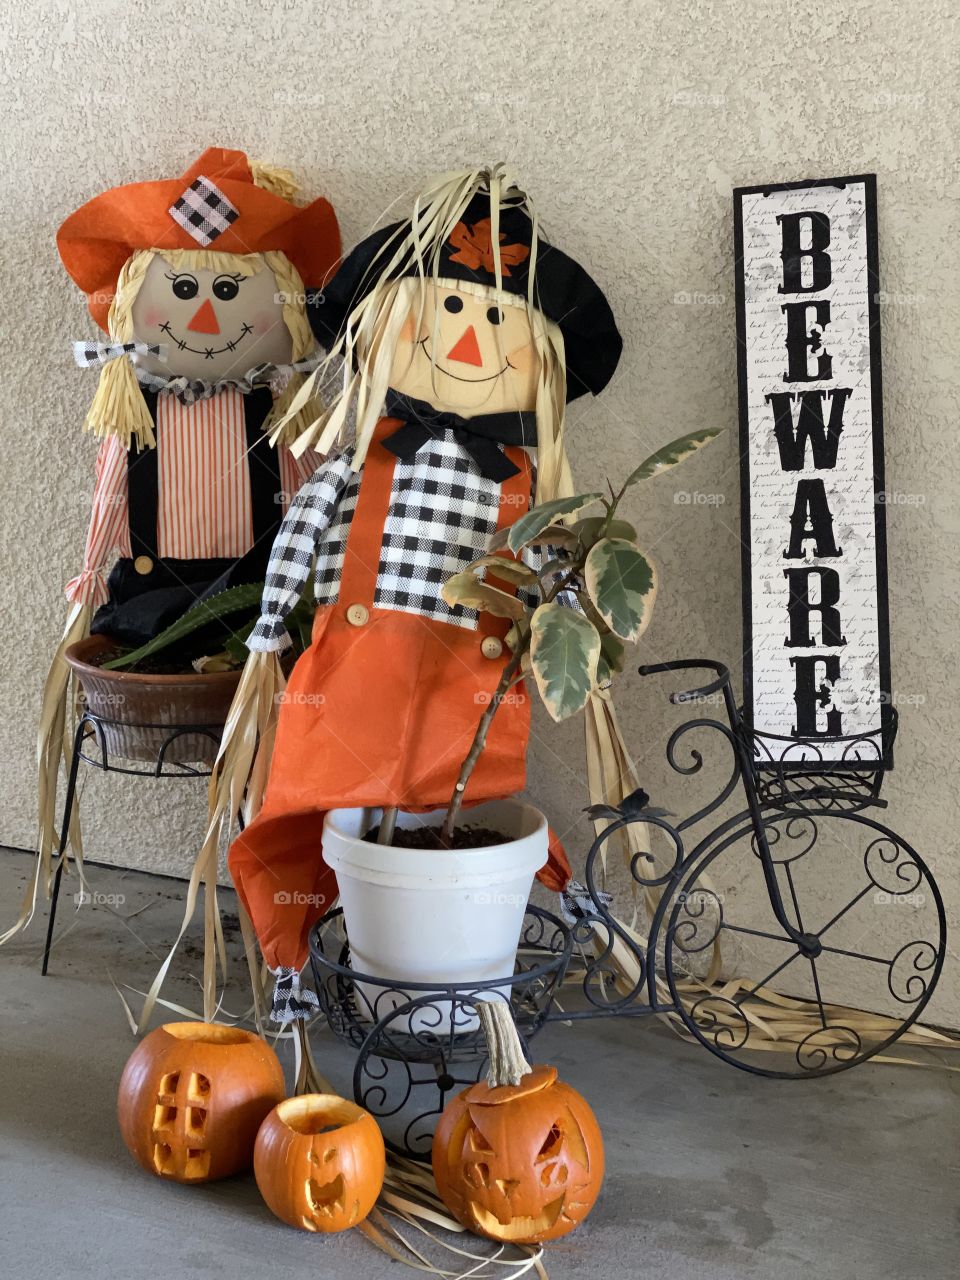 Beware an apartment front entrance  with Halloween decorations in the month of October 